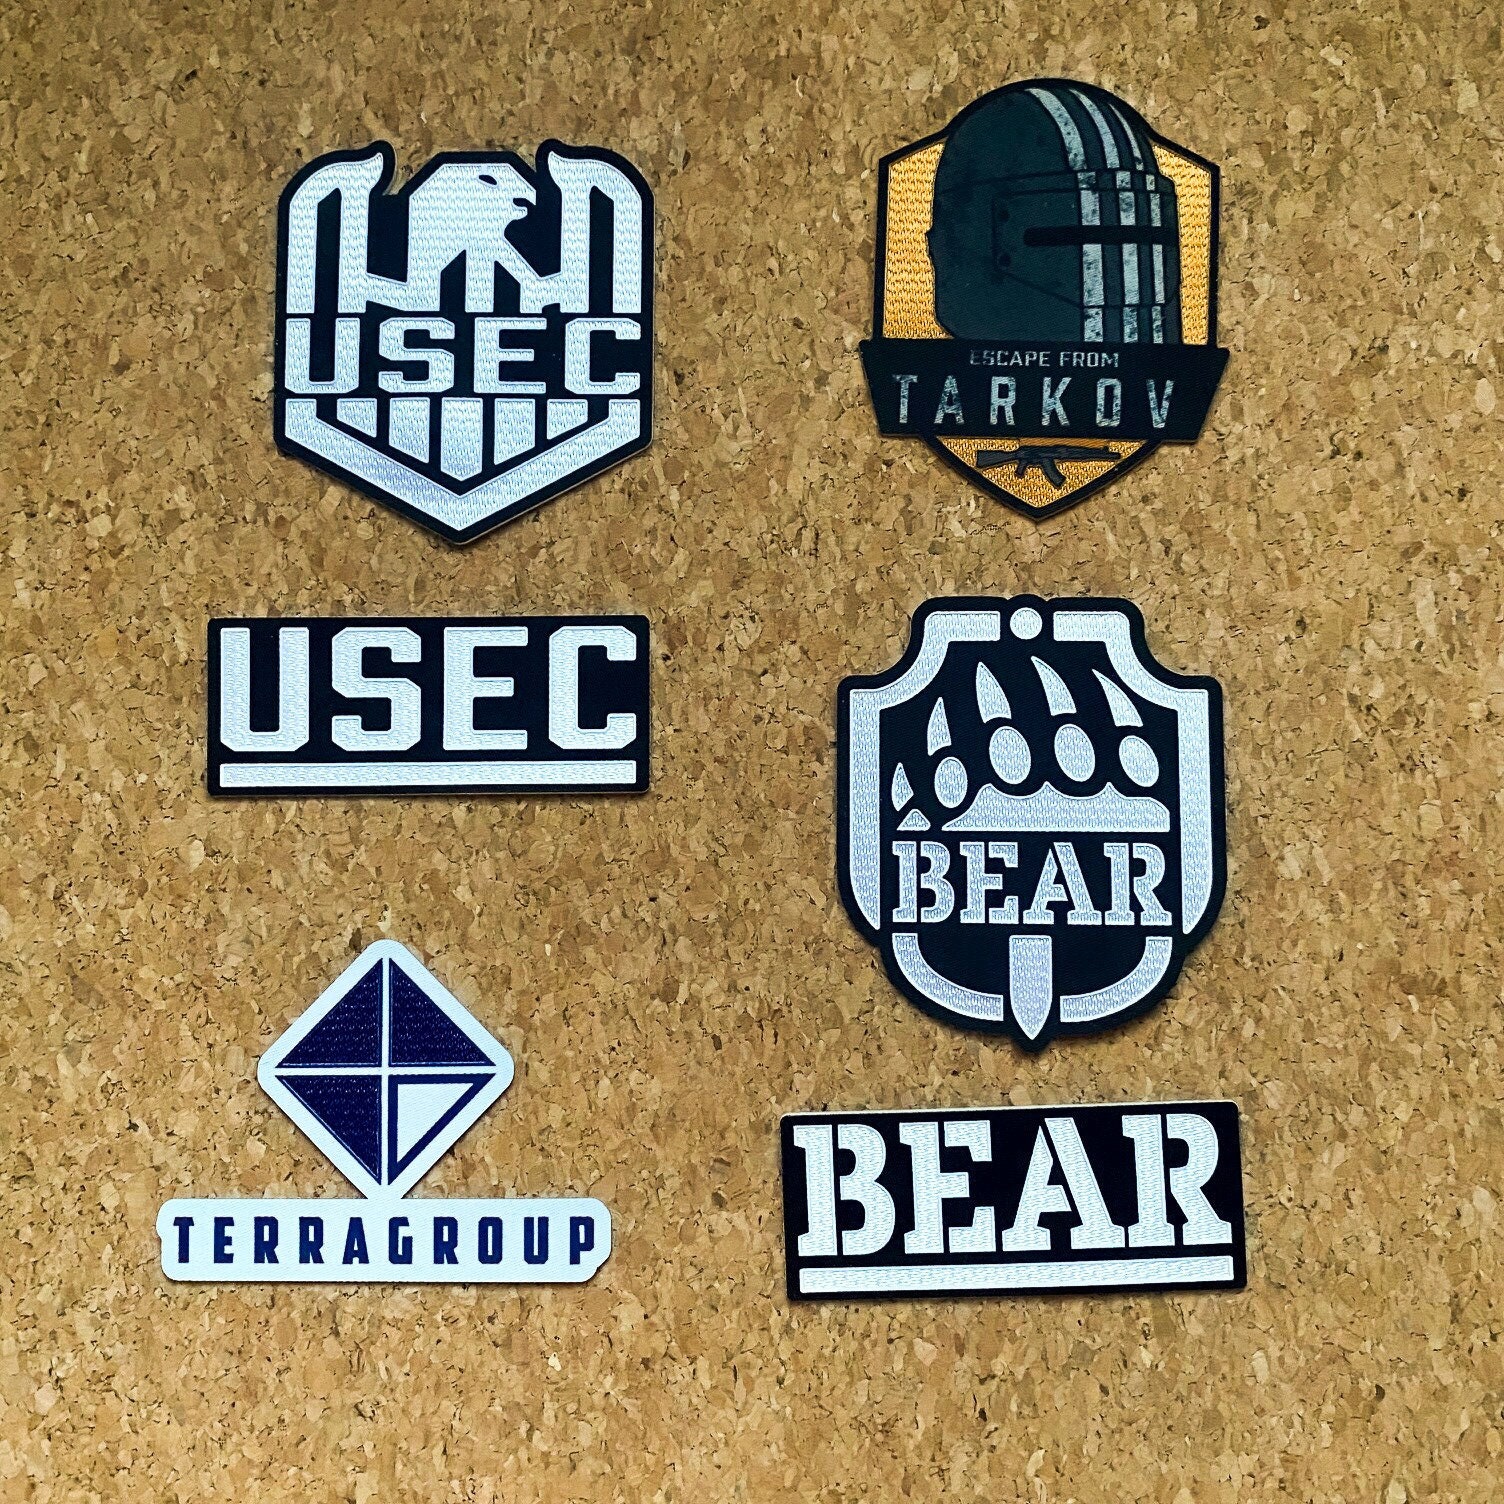 USEC anddog tag set #gaming Escape from Tarkov morale patch set including BEAR 